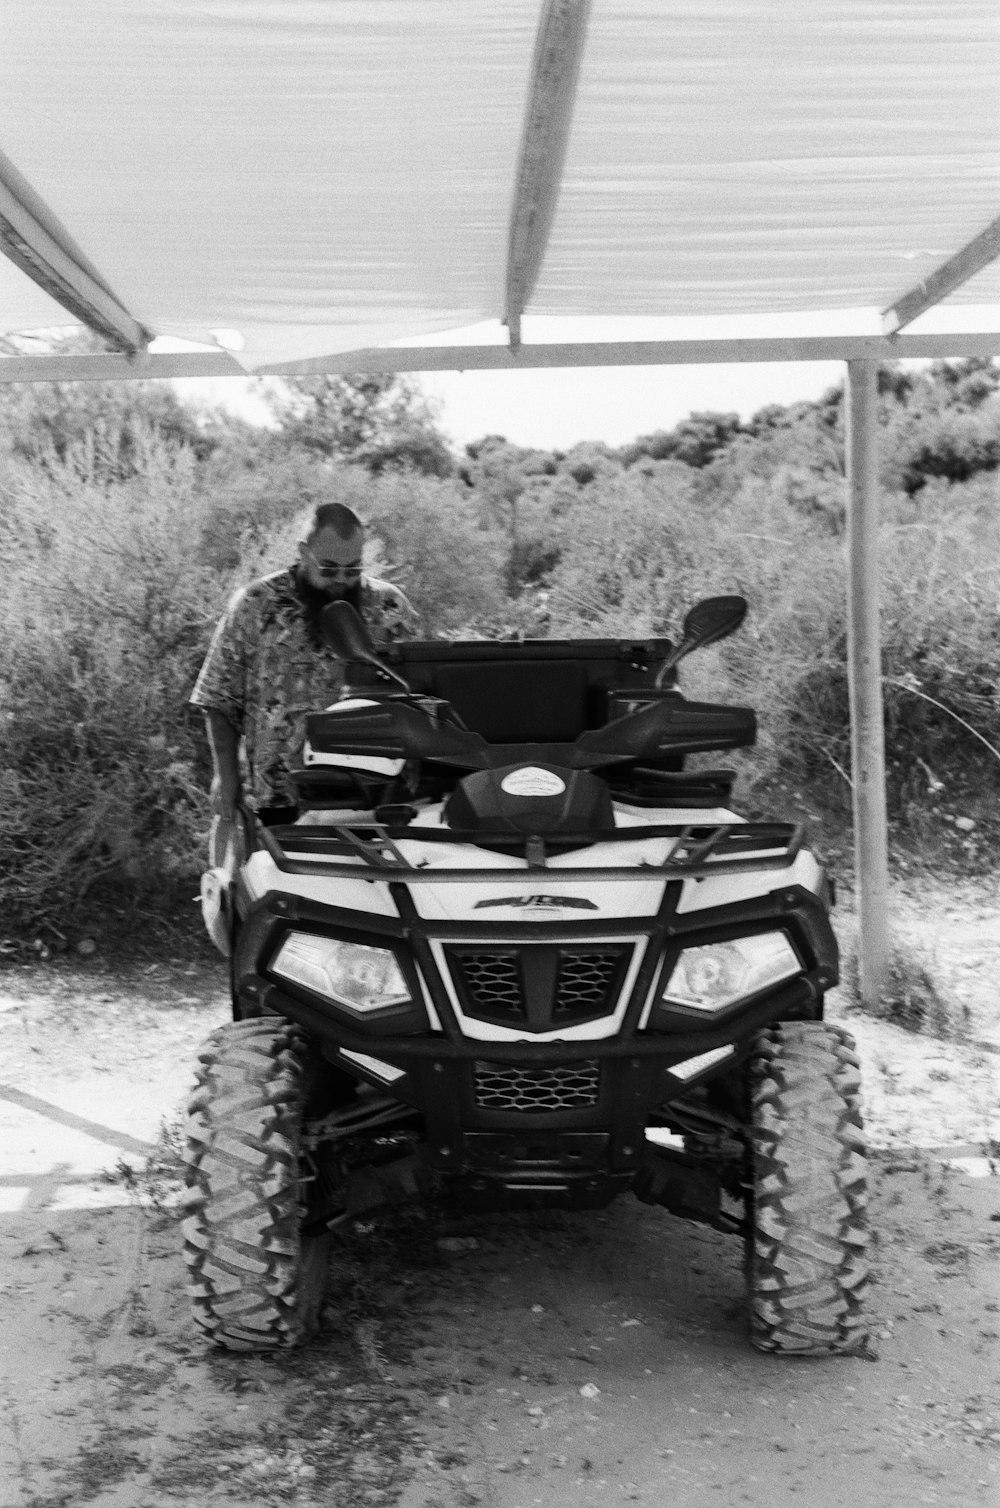 a man is sitting on a four wheeler